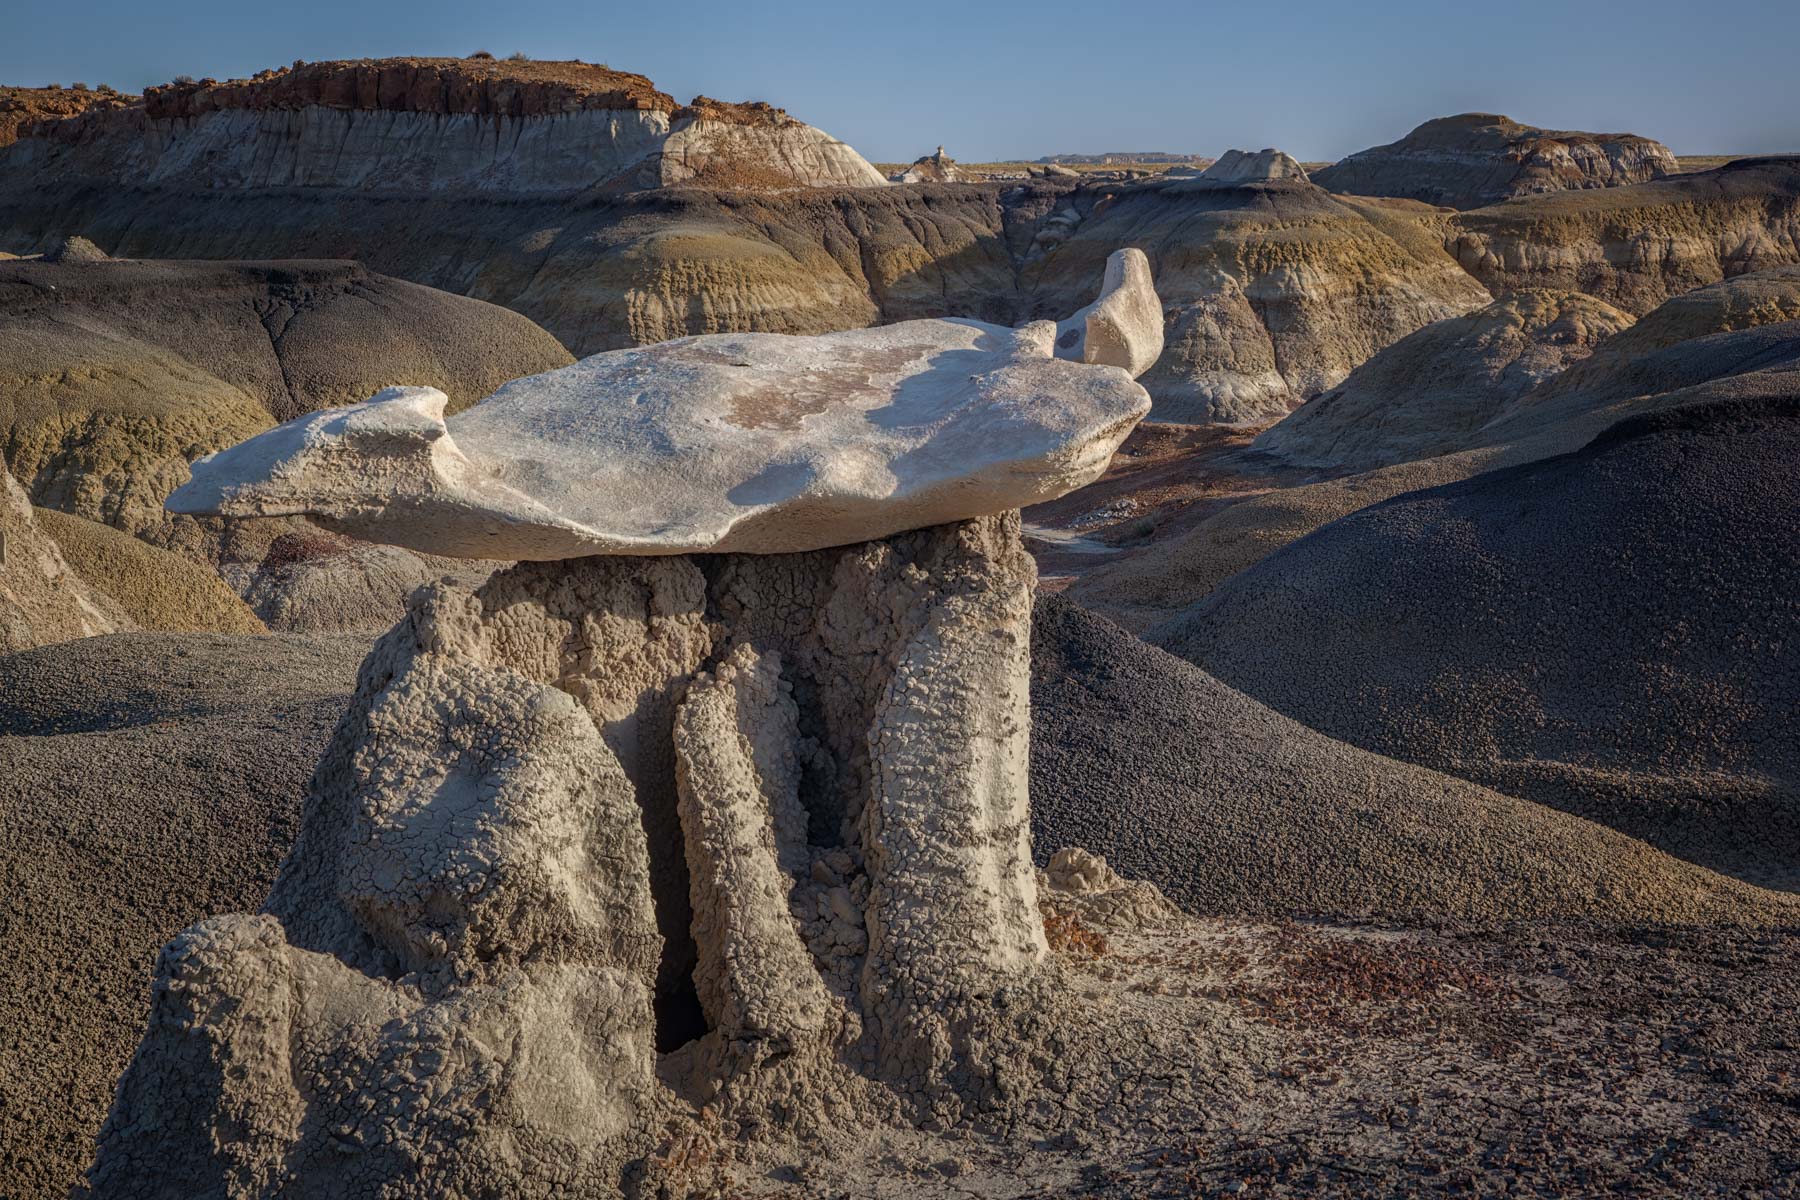 The Manta Ray rock formation in the Bisti Badlands